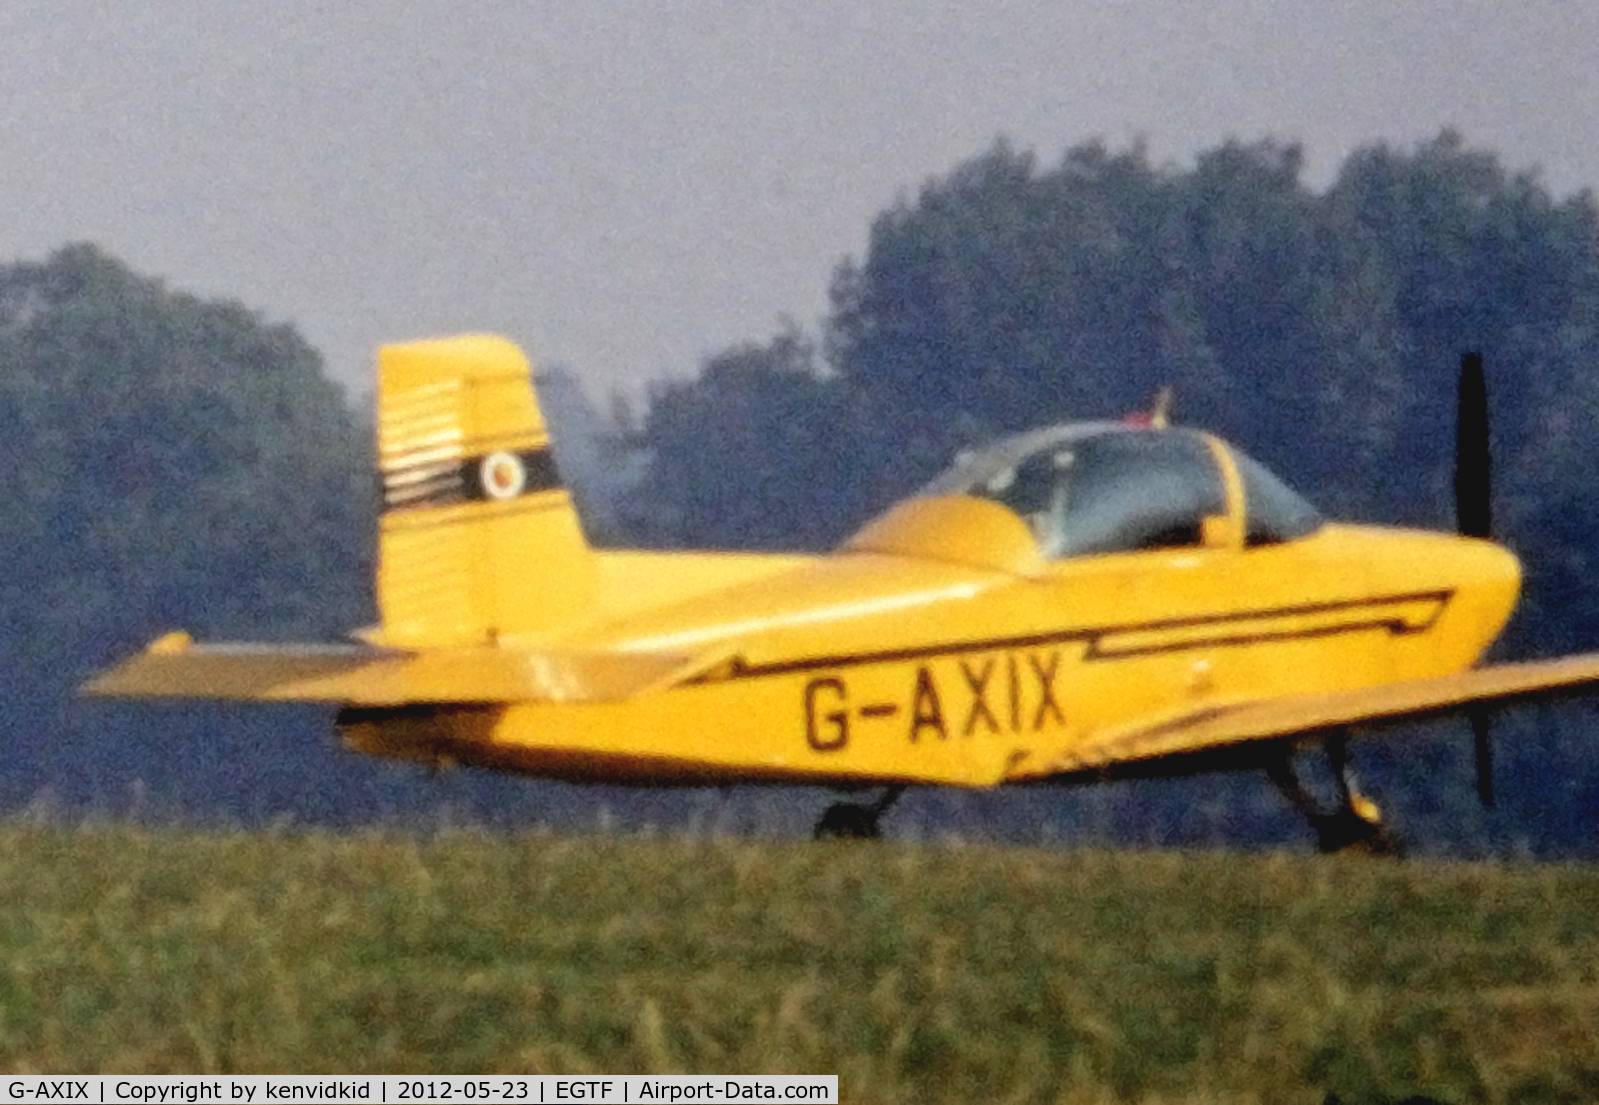 G-AXIX, 1969 AESL Glos-Airtourer Super 150/T4 C/N A527, At Fairoaks in the mid 1970's.
Copied from slide.